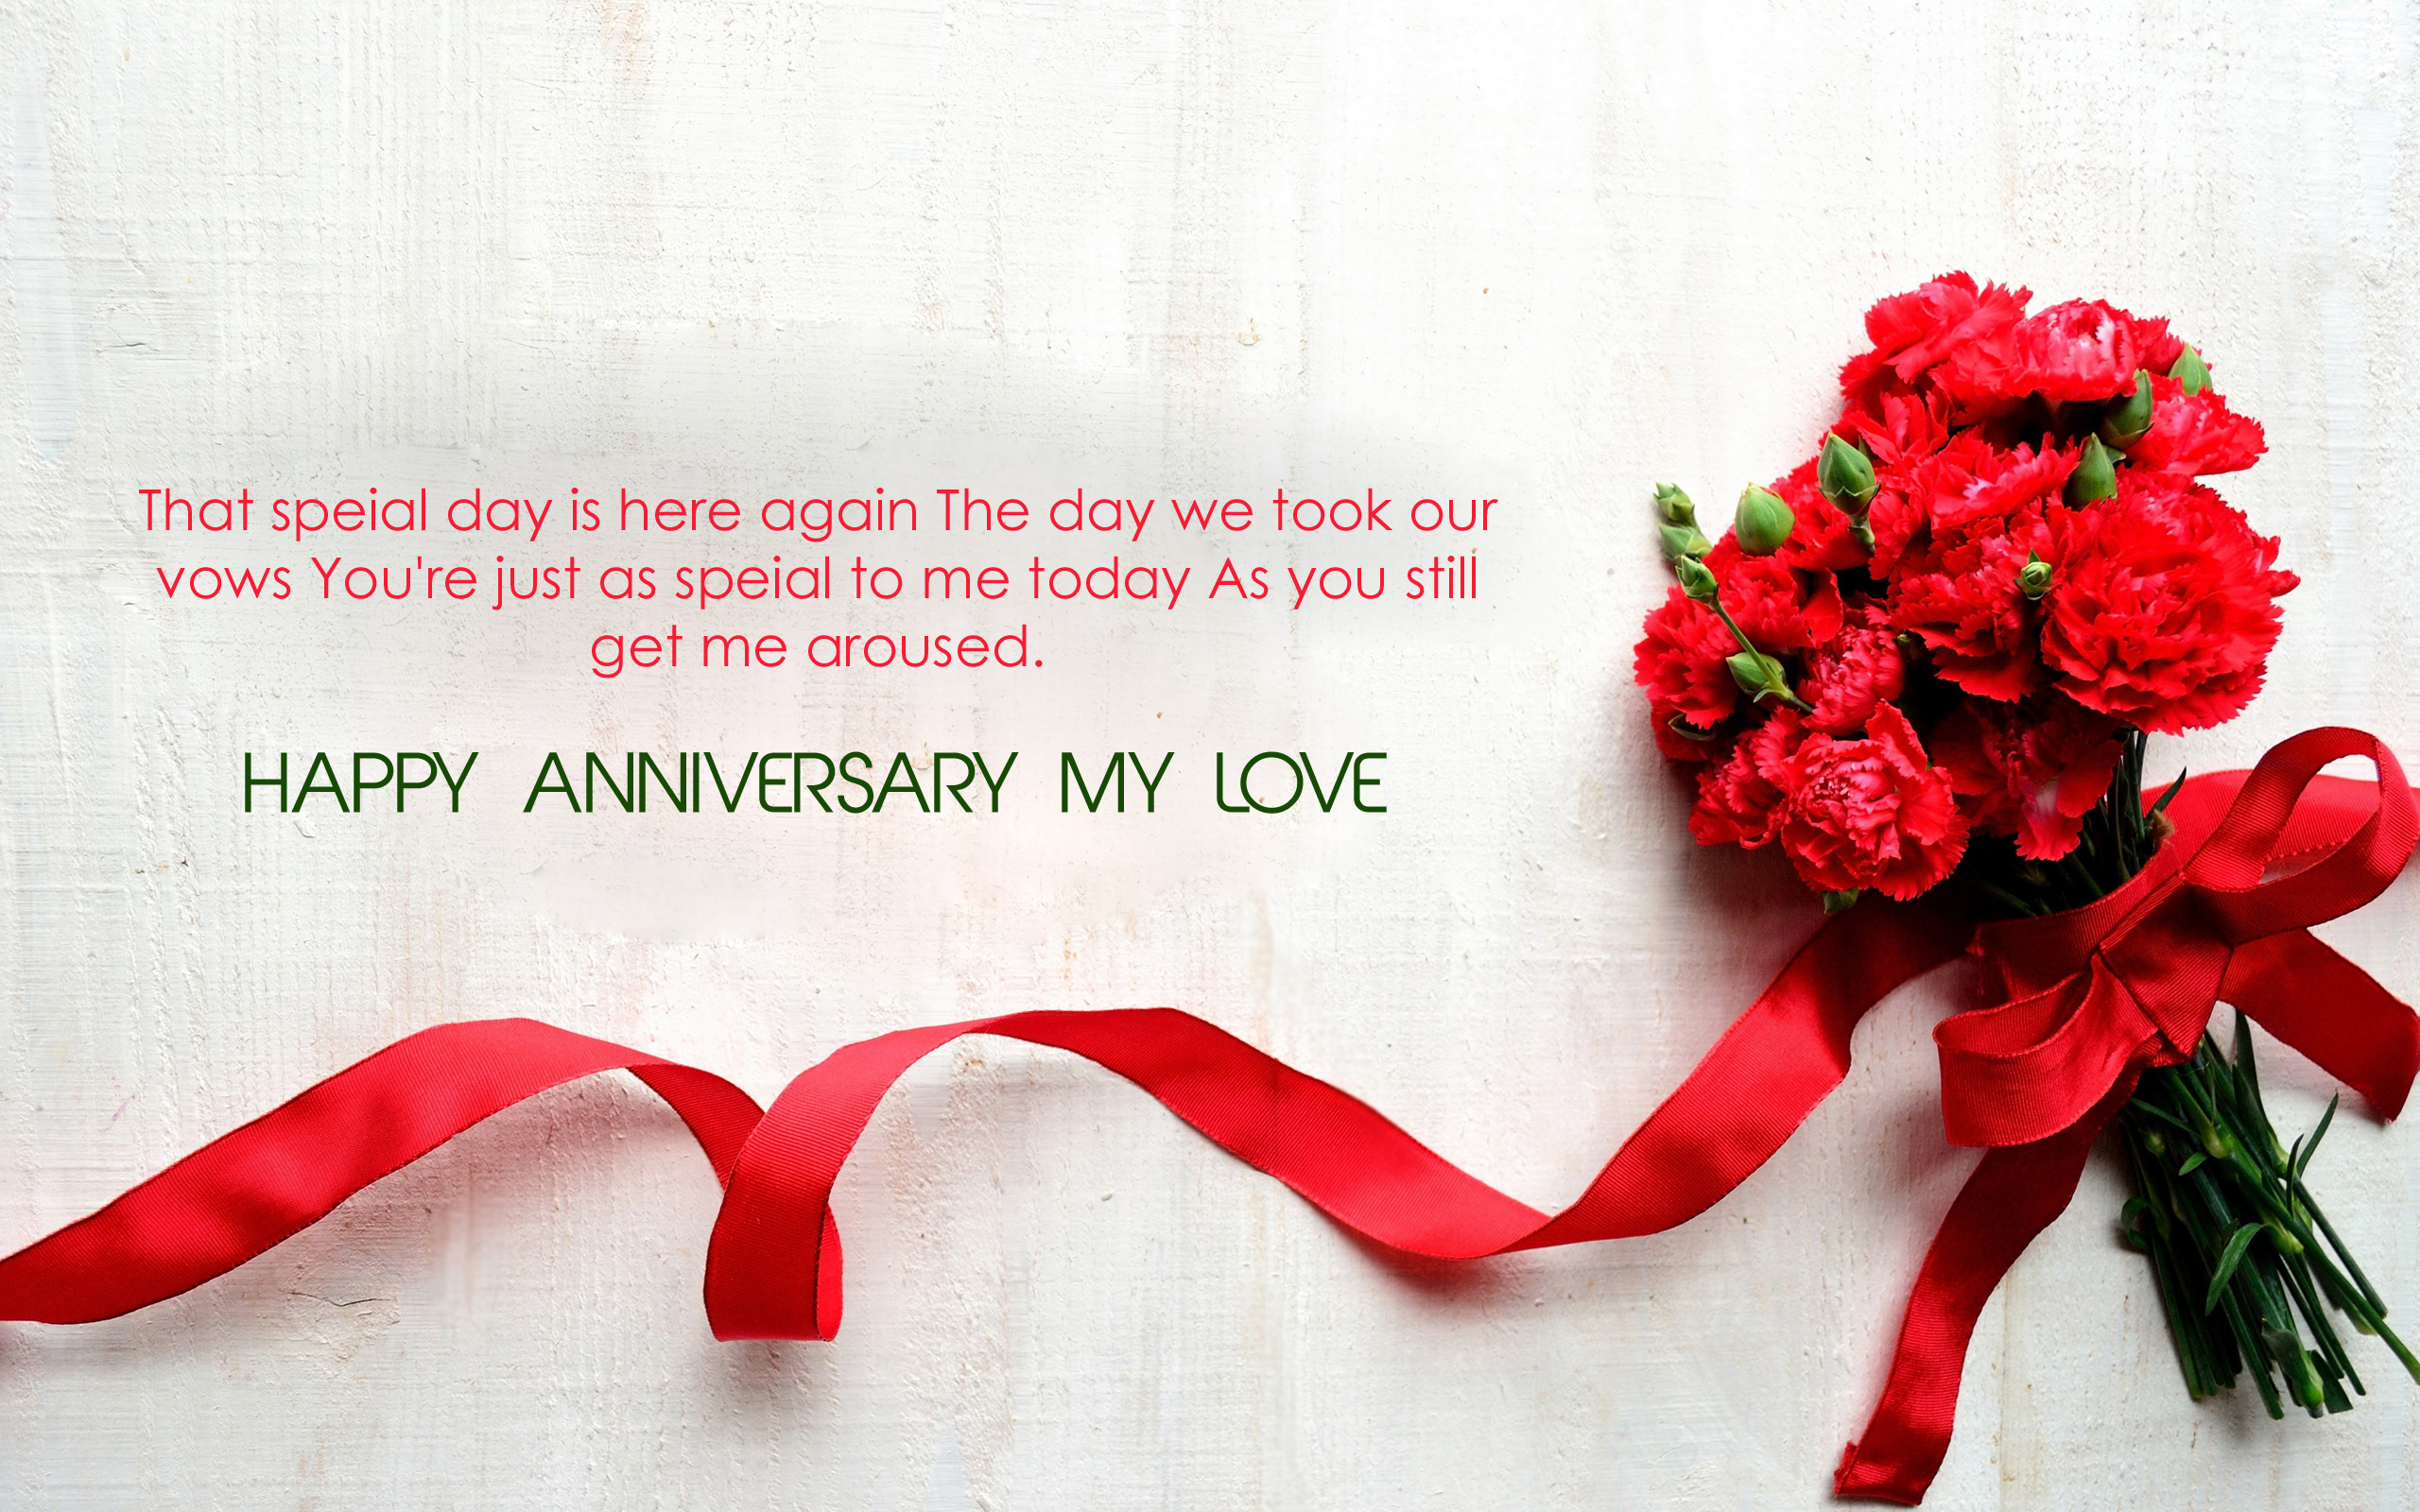 Wedding Anniversary Wishes Messages Image freeto5animations.com Wallpaper, Gifs, Background, Image